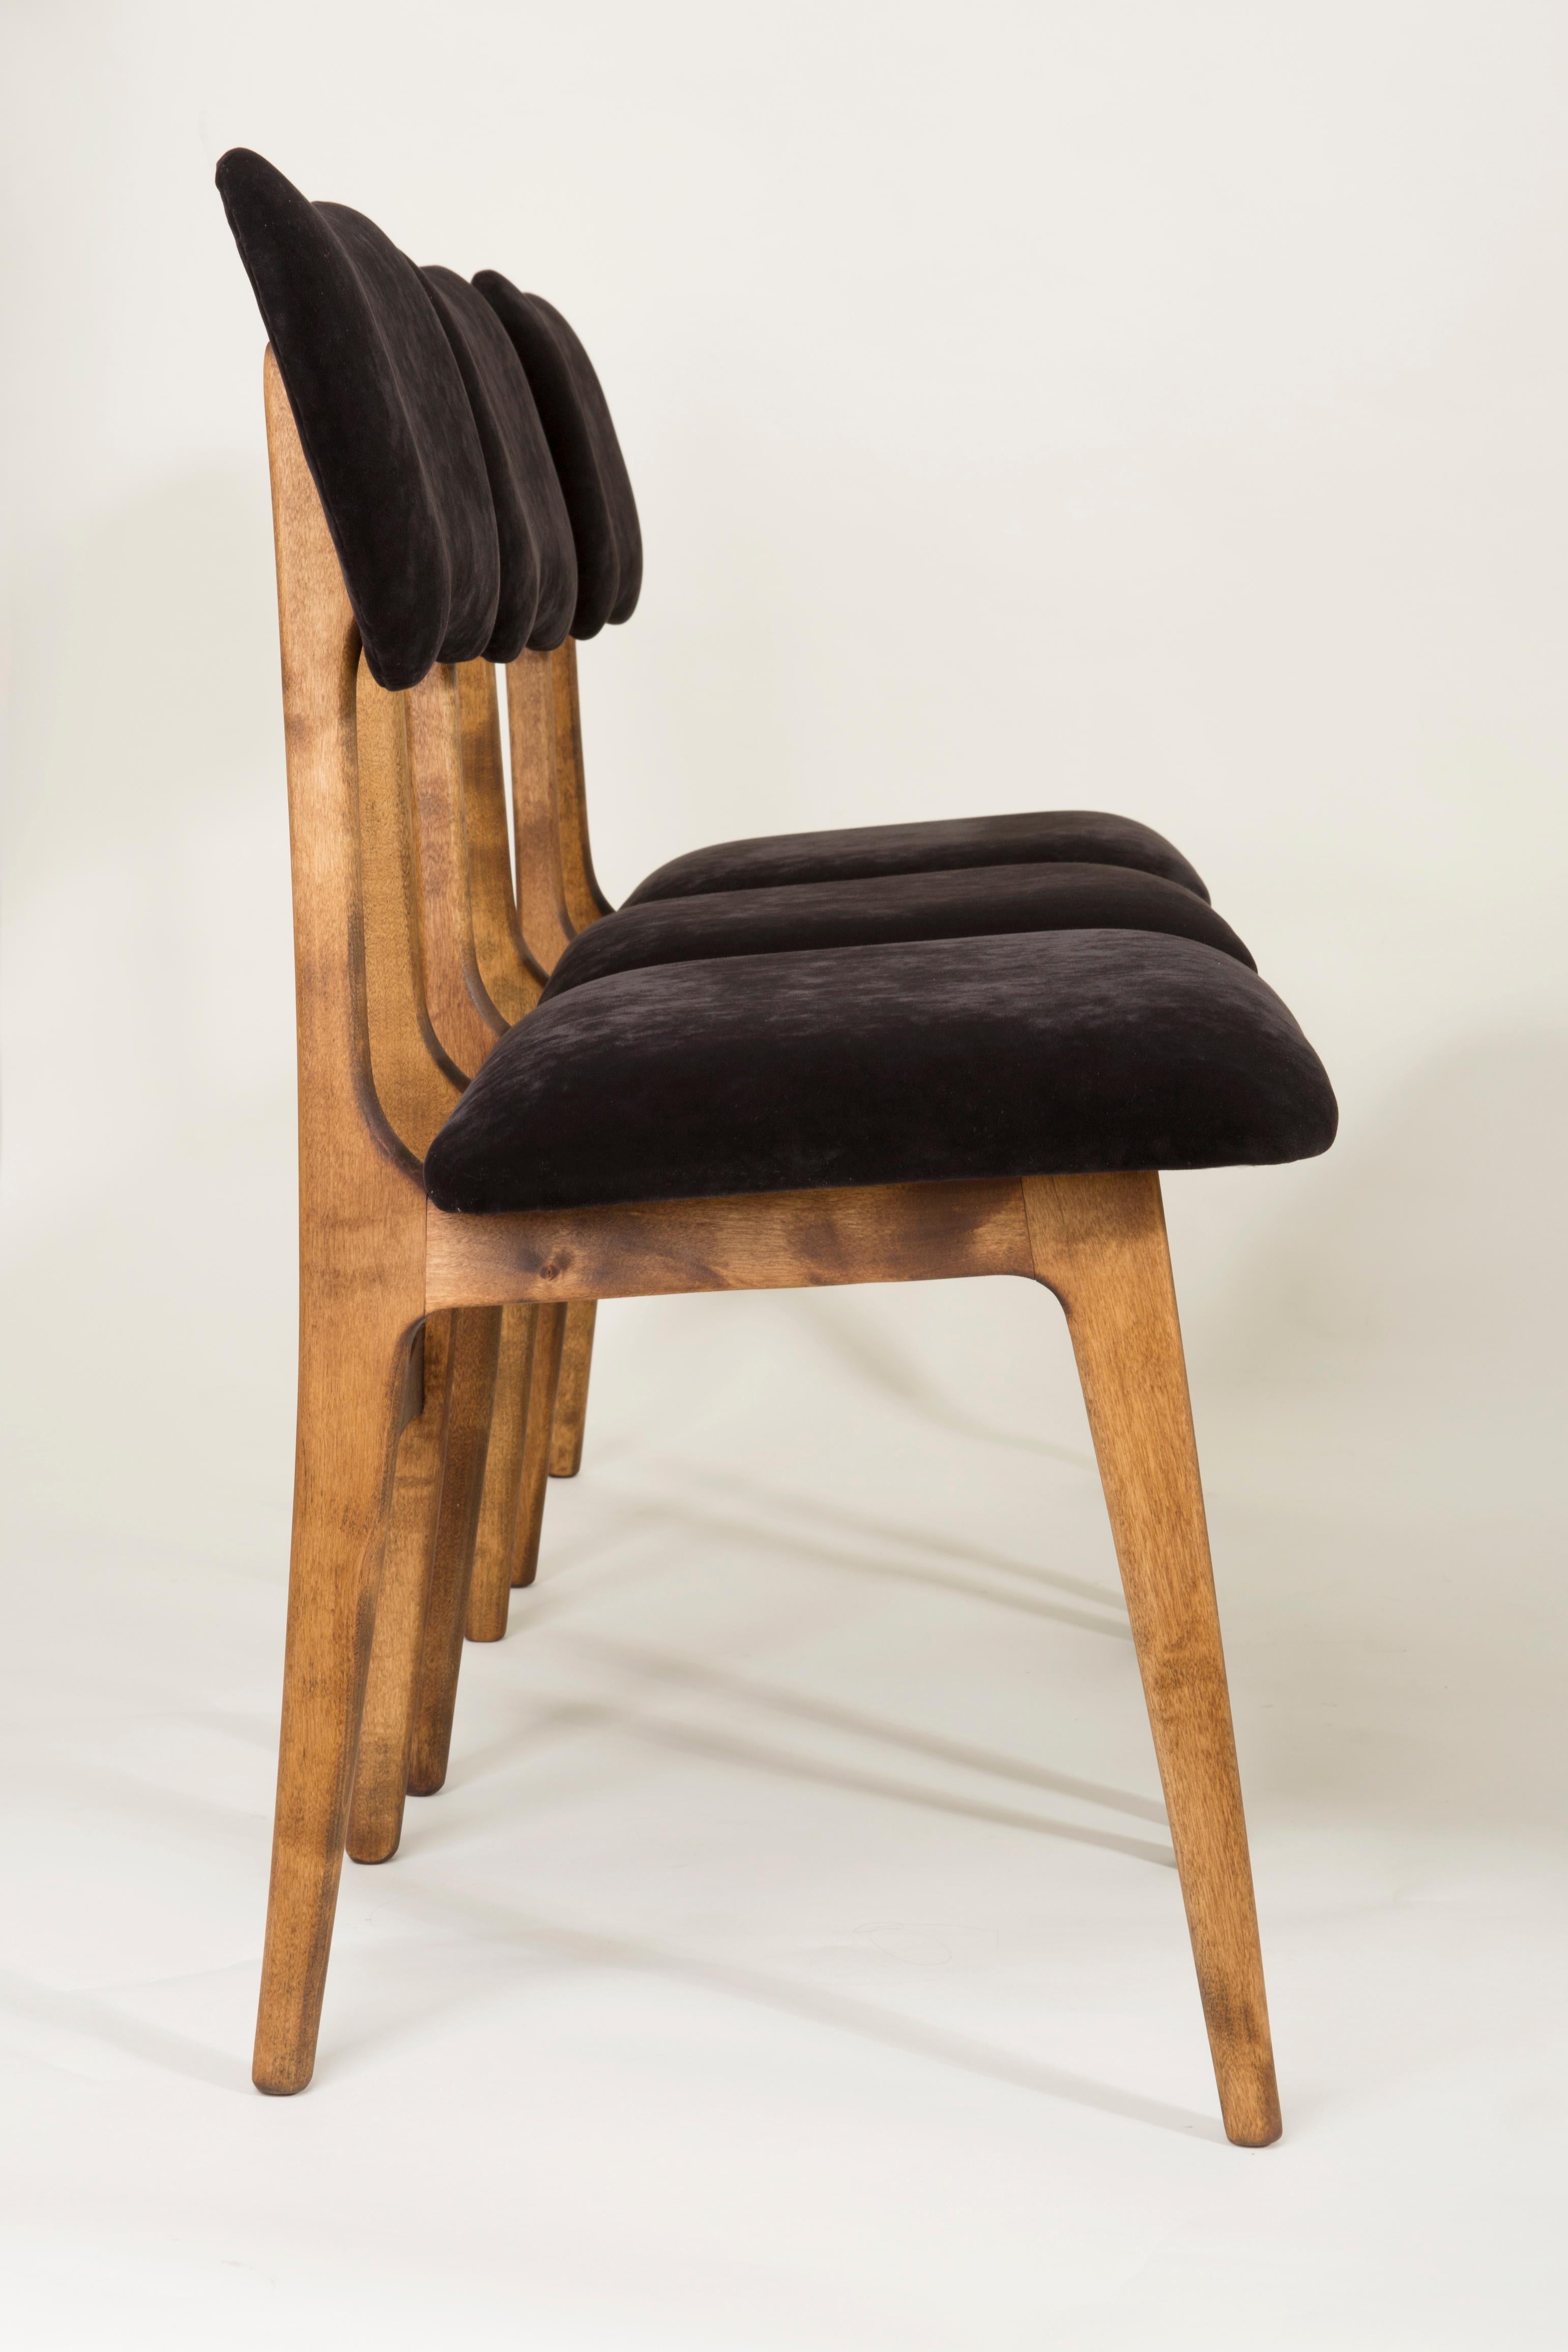 Set of Six 20th Century Black Velvet Chairs, Europe, 1960s For Sale 2